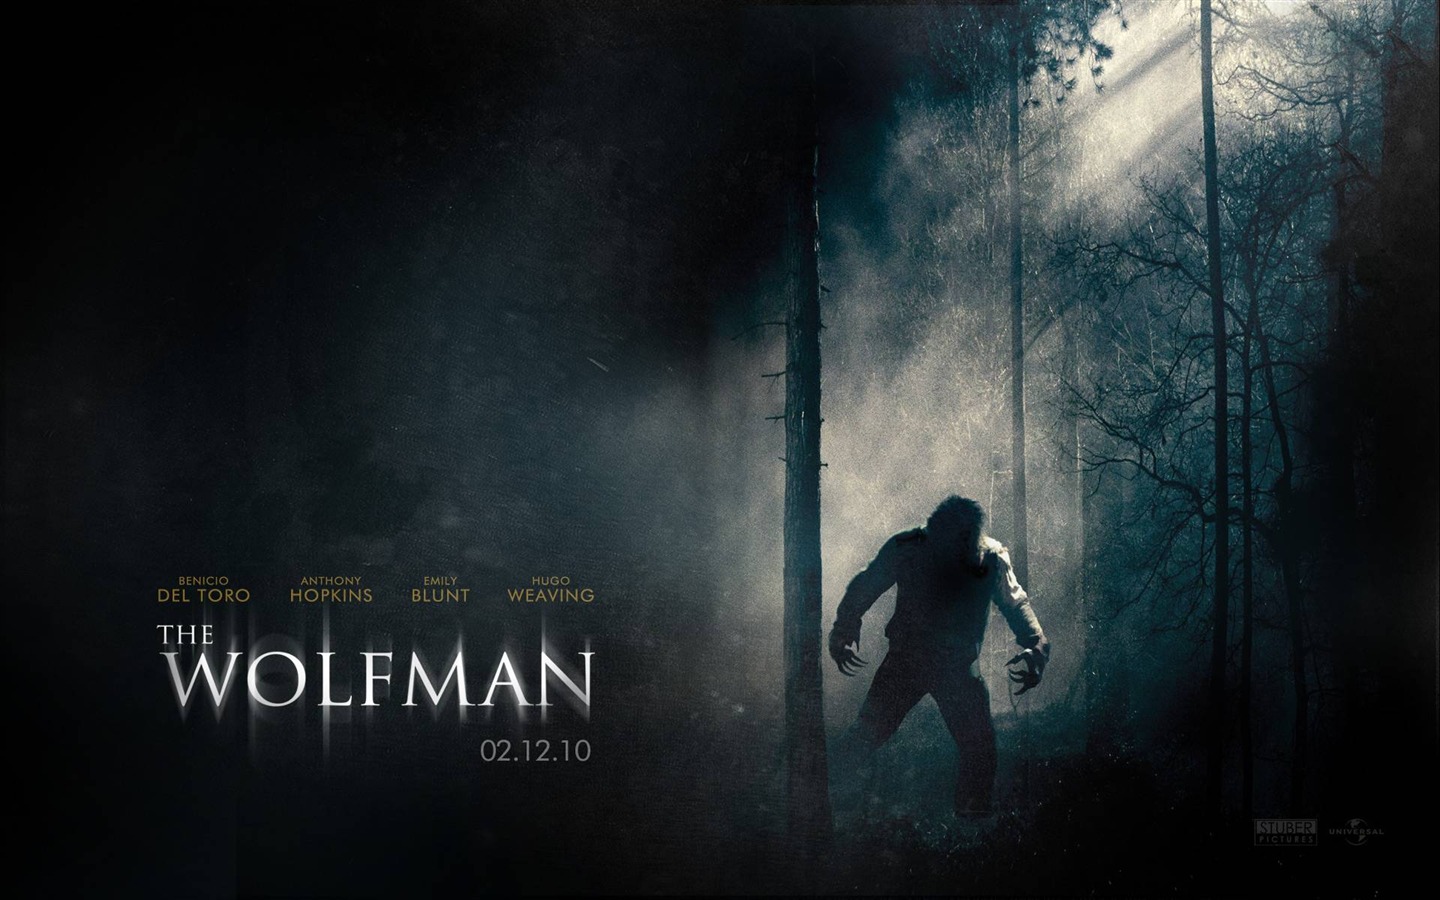 The Wolfman Movie Wallpapers #2 - 1440x900